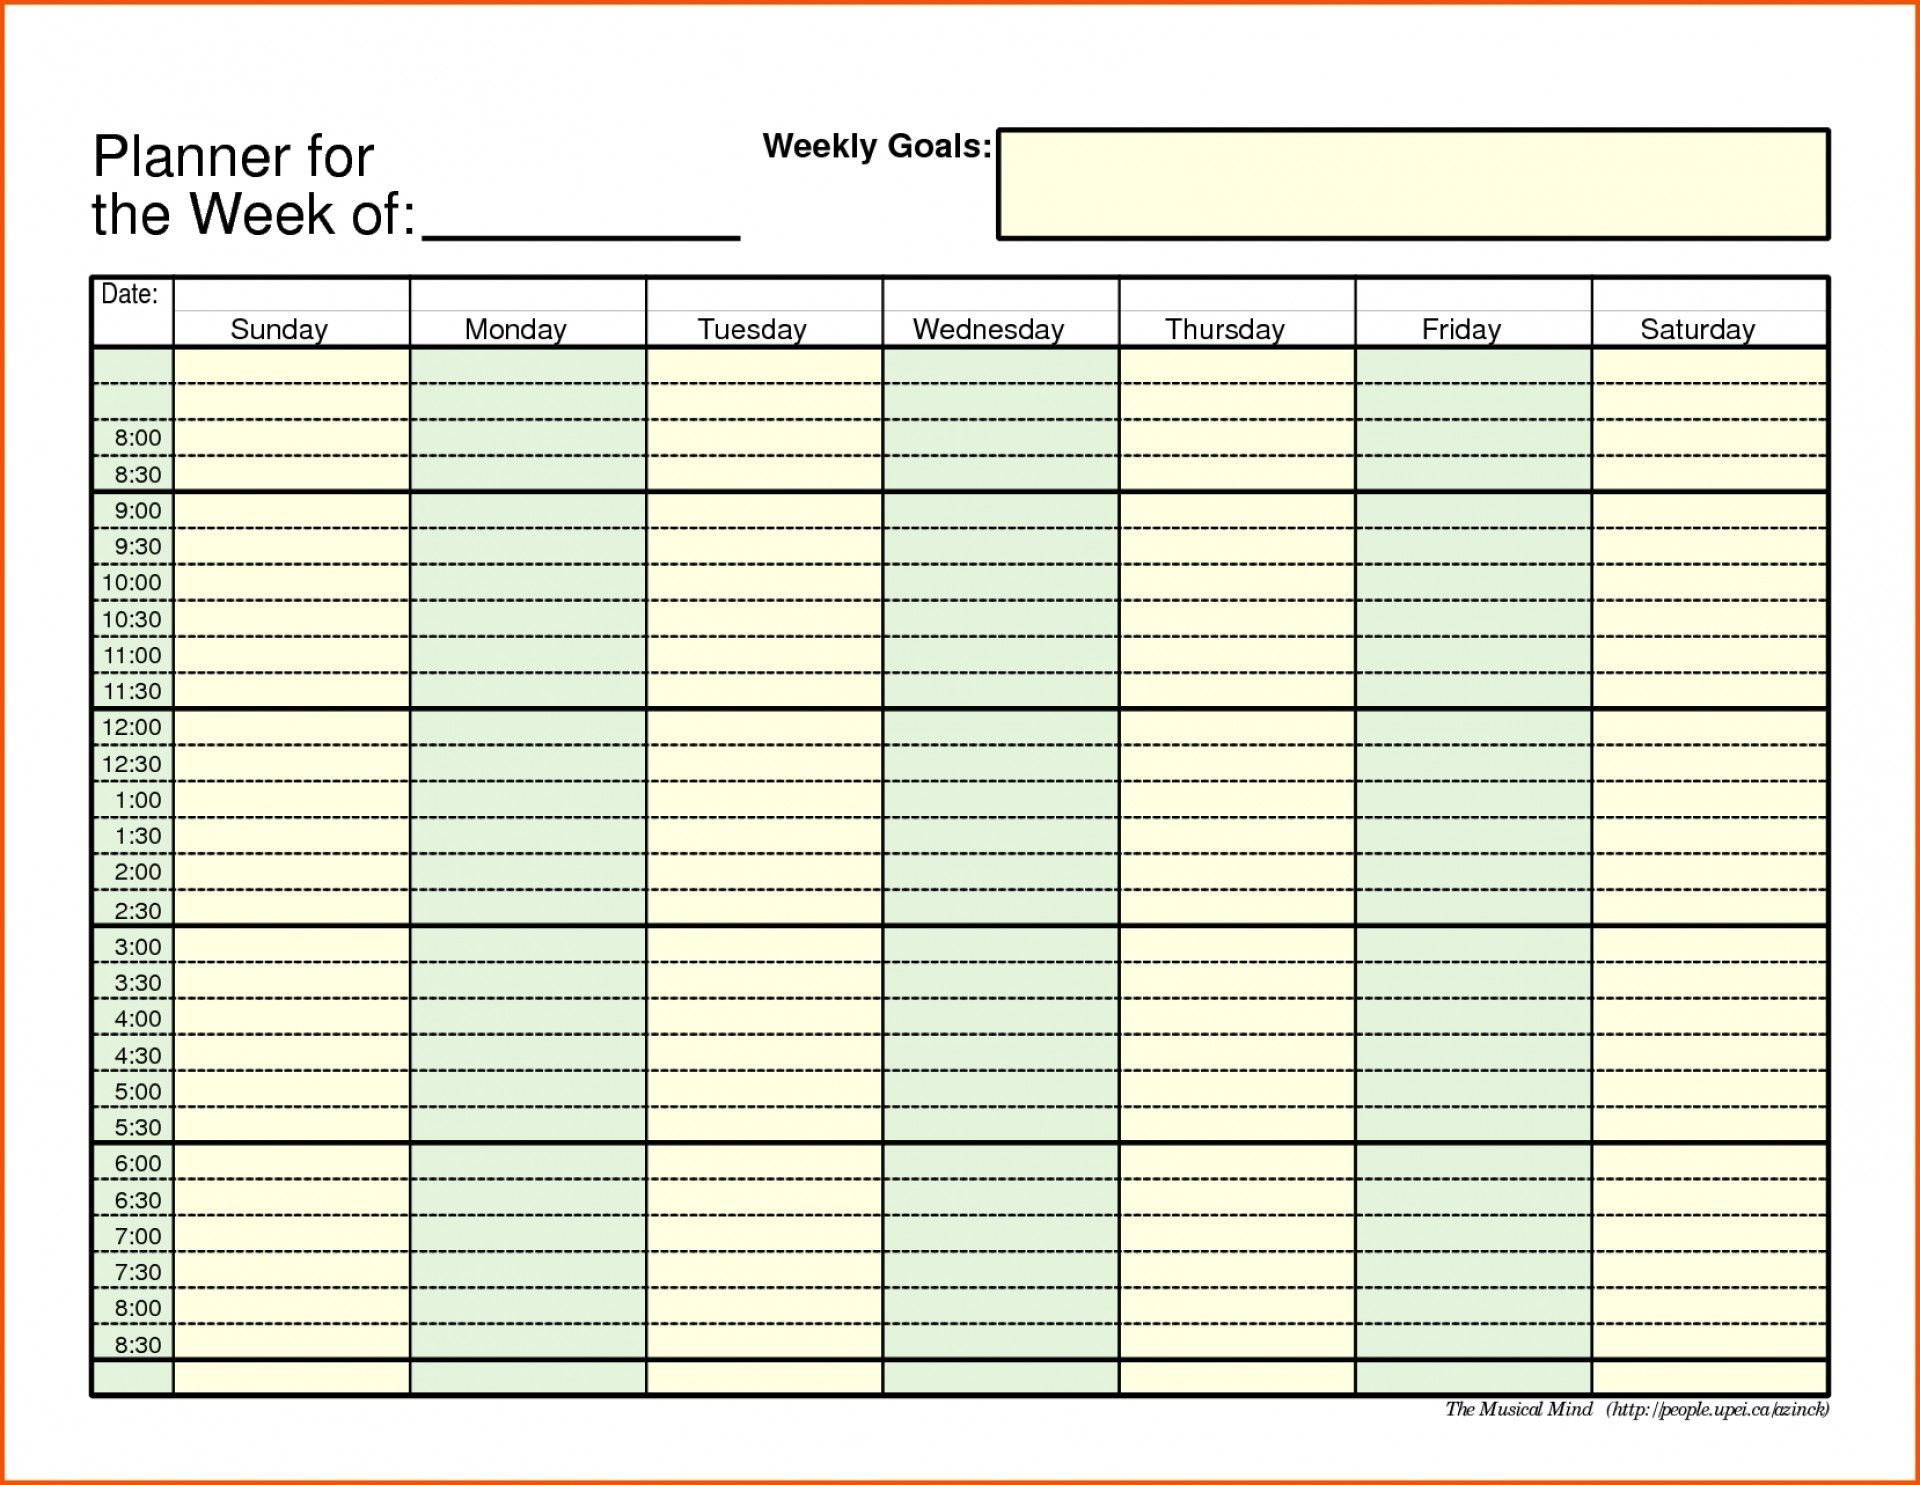 printable daily schedule with time slots blank weekly